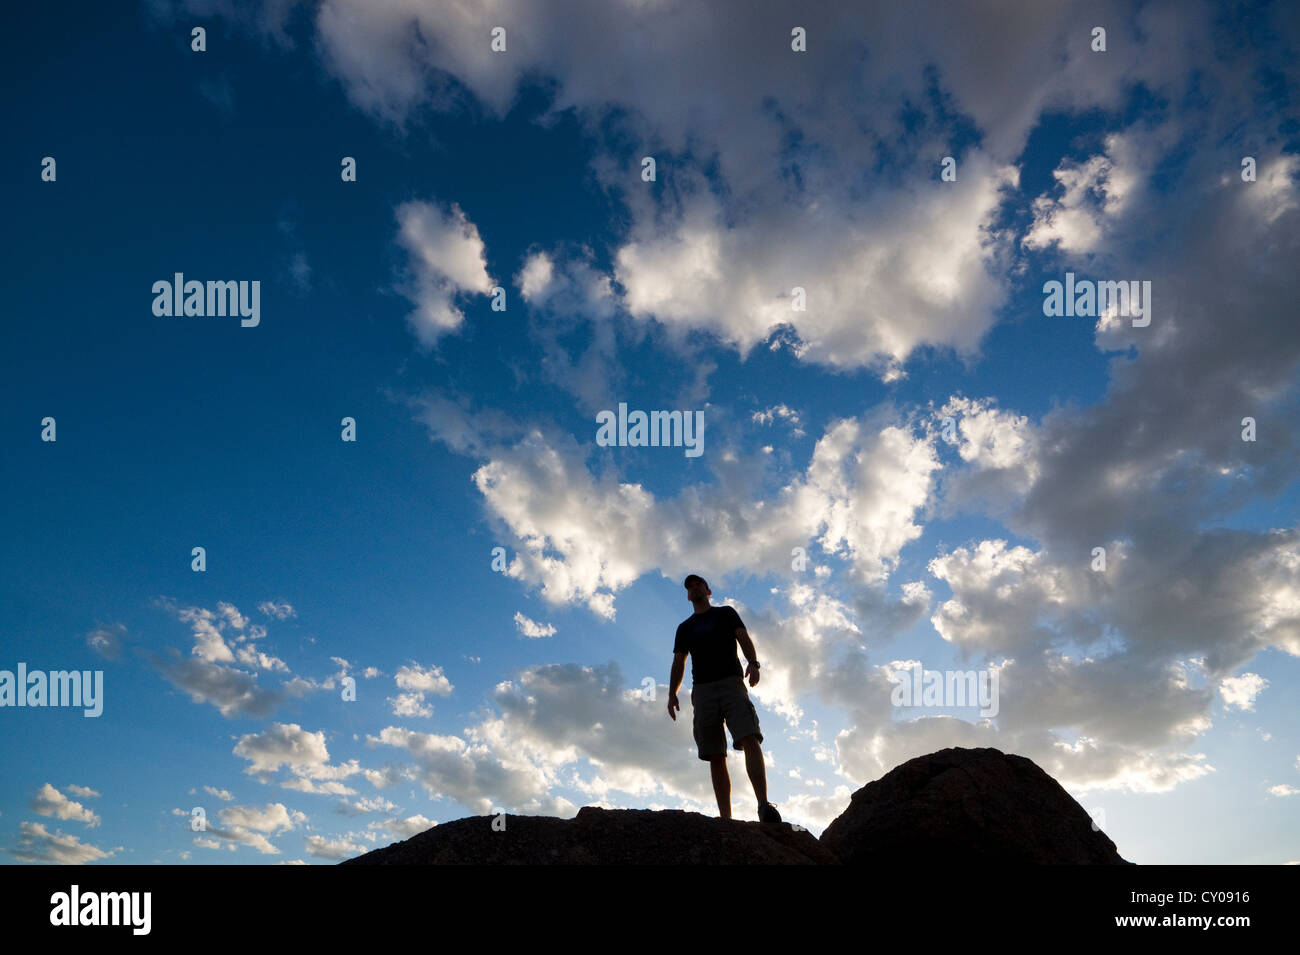 Silhouette of male figure standing on rock Stock Photo